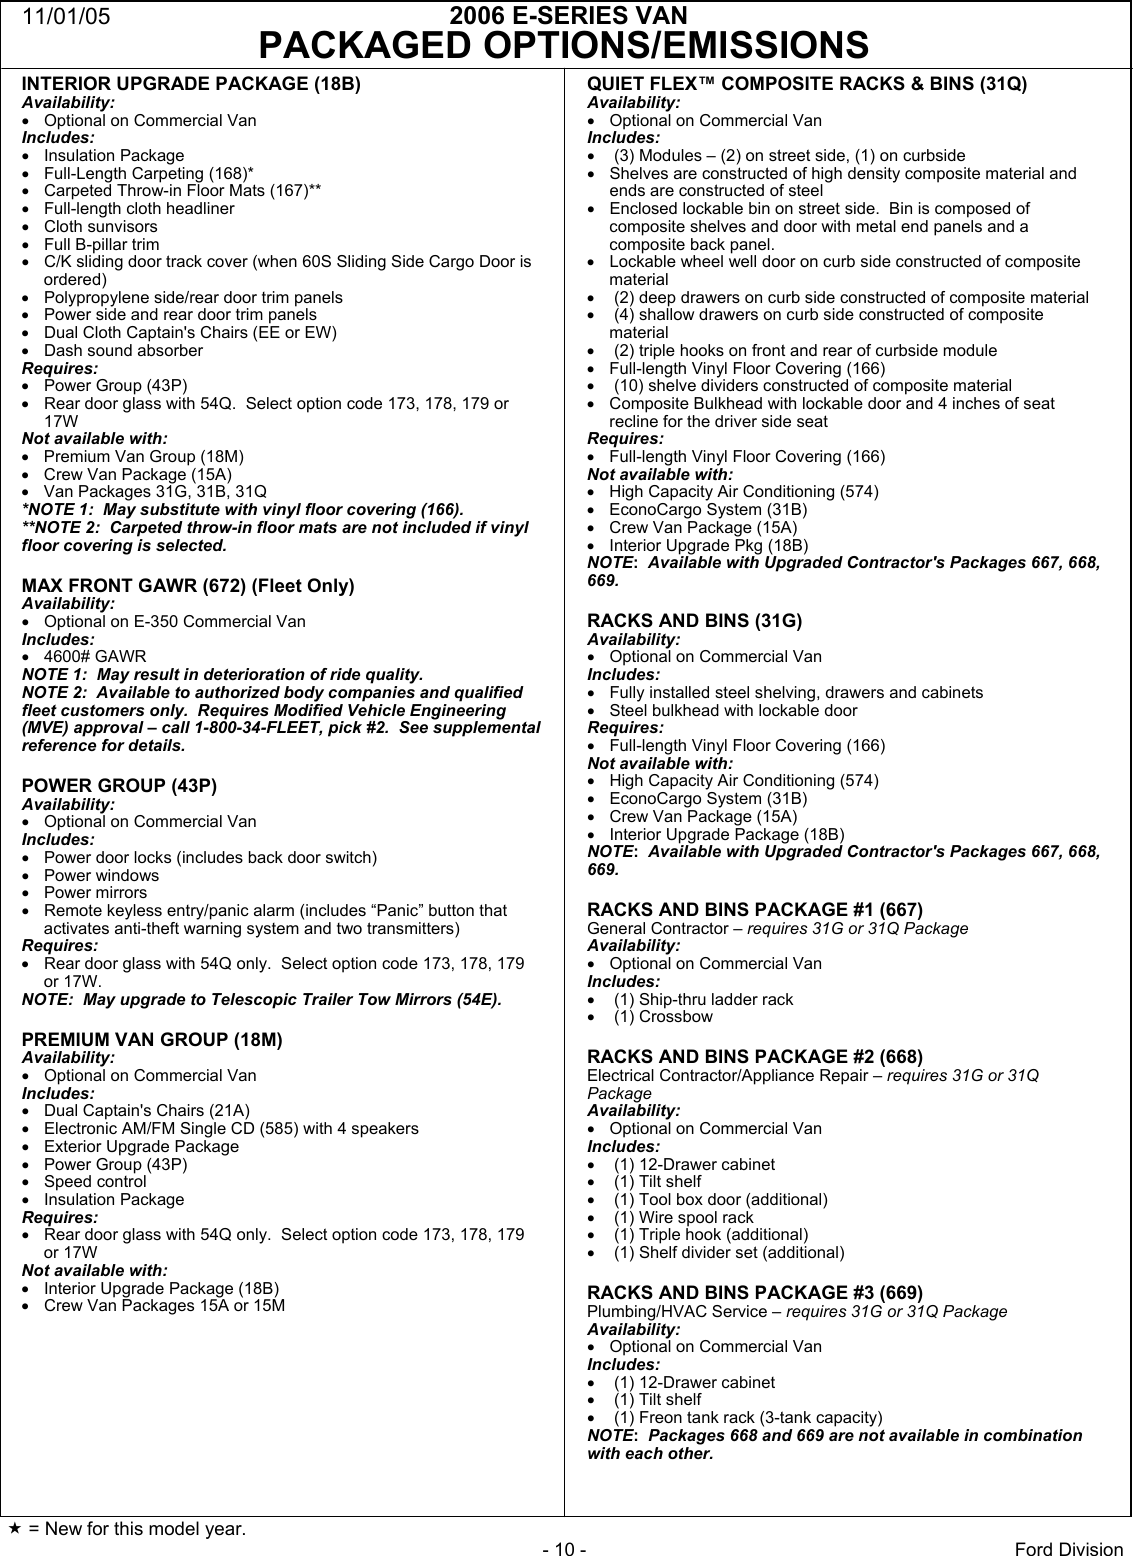 Page 10 of 12 - Ford Ford-2006-E-Series-Specification-Sheet 68xE-Series VanCom